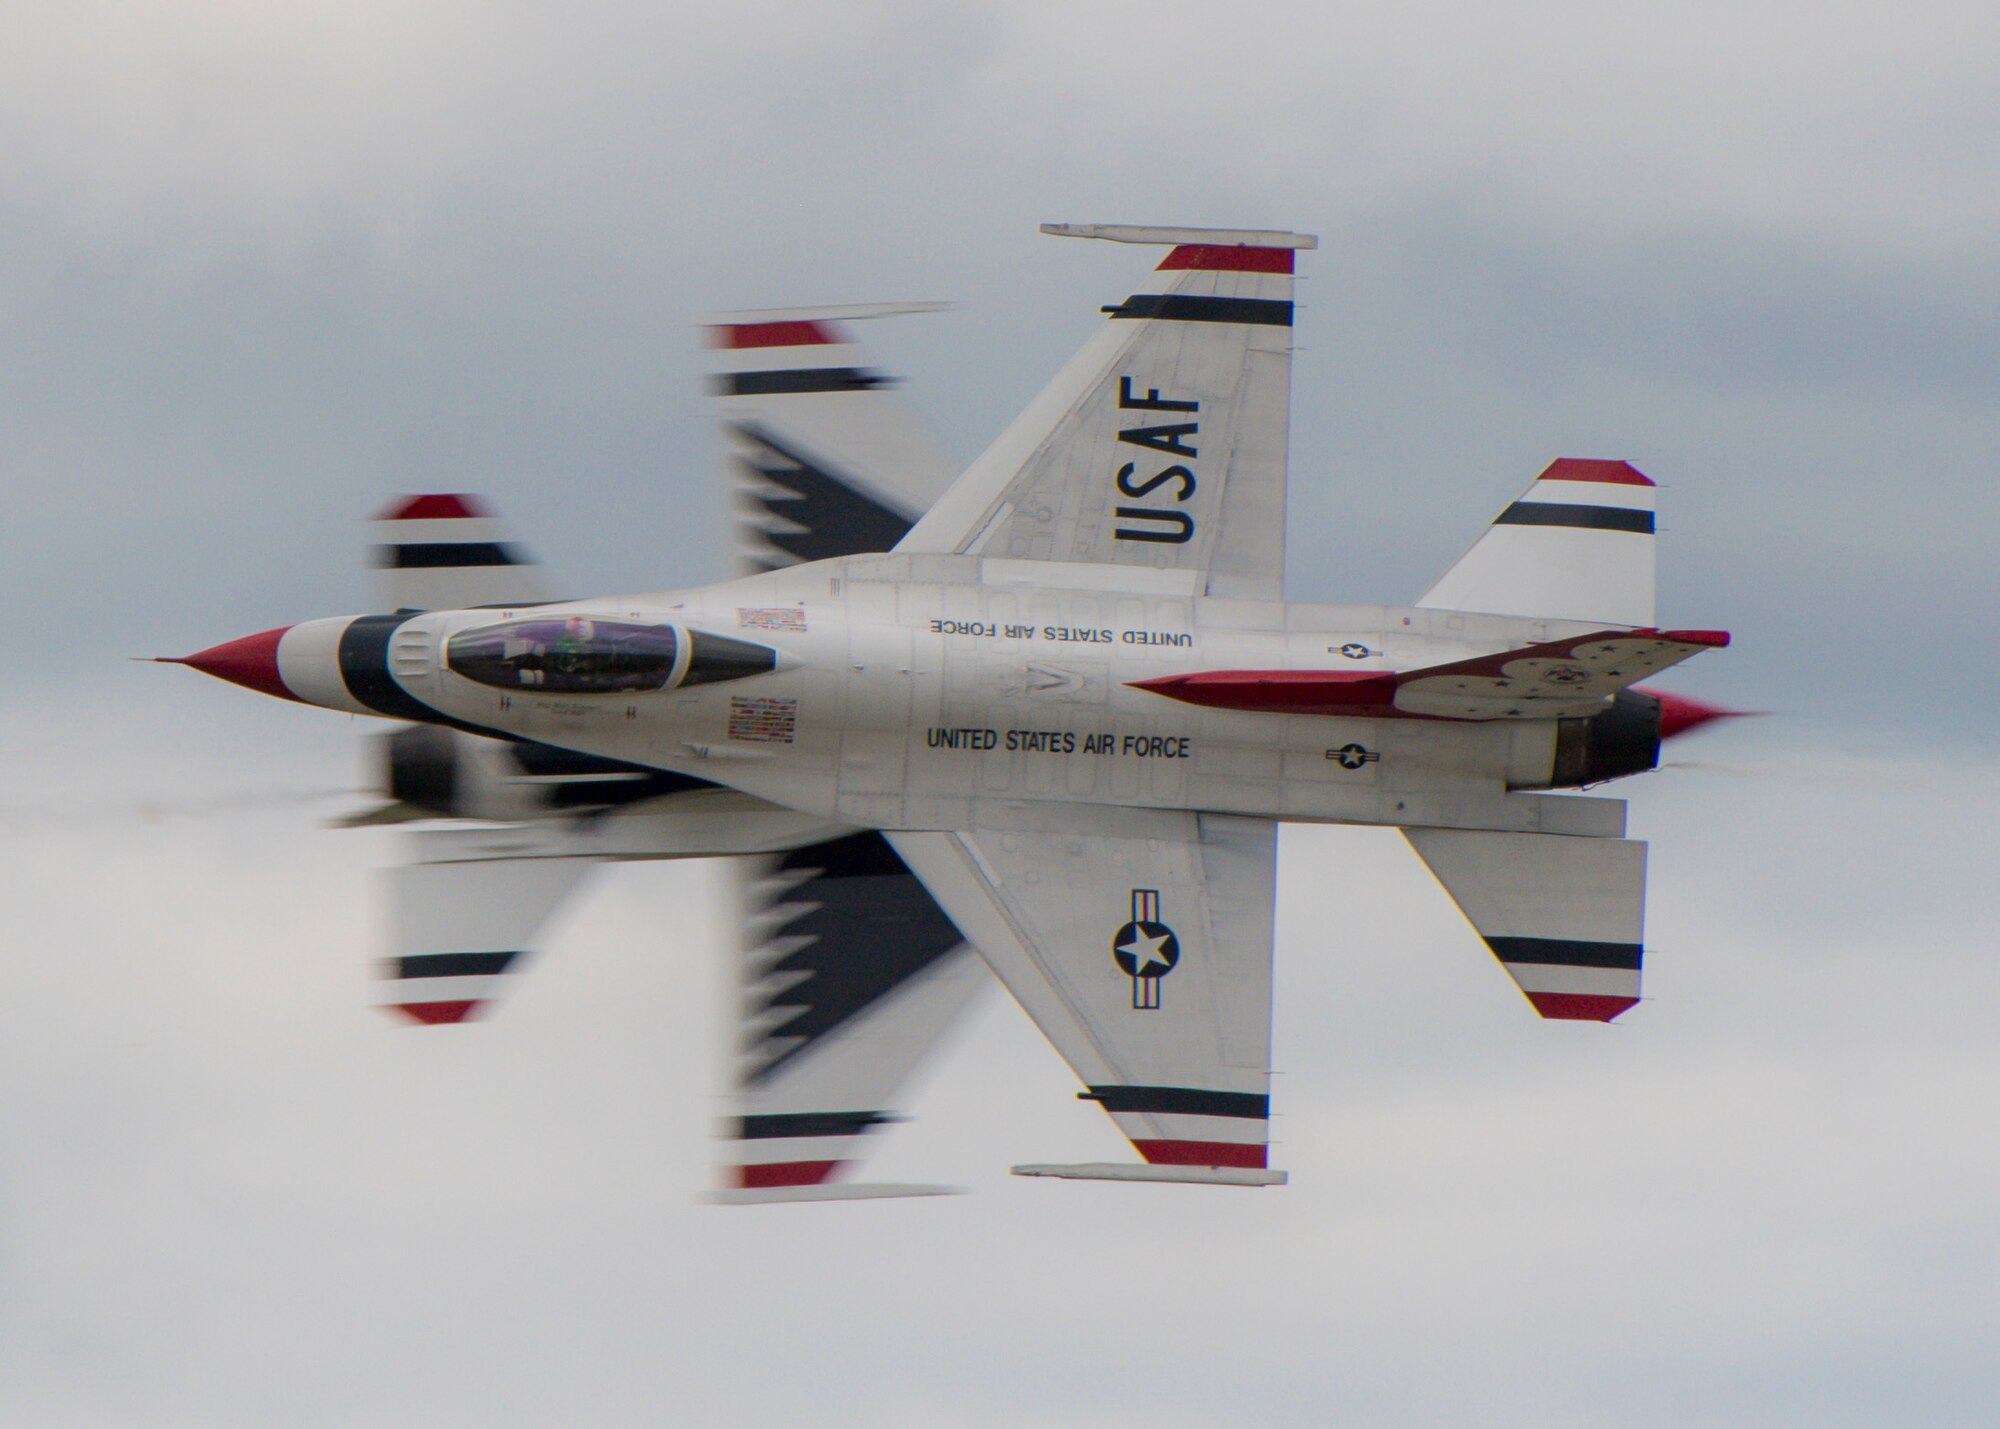 Thunderbirds perform over the skies of Rocherster, N.Y